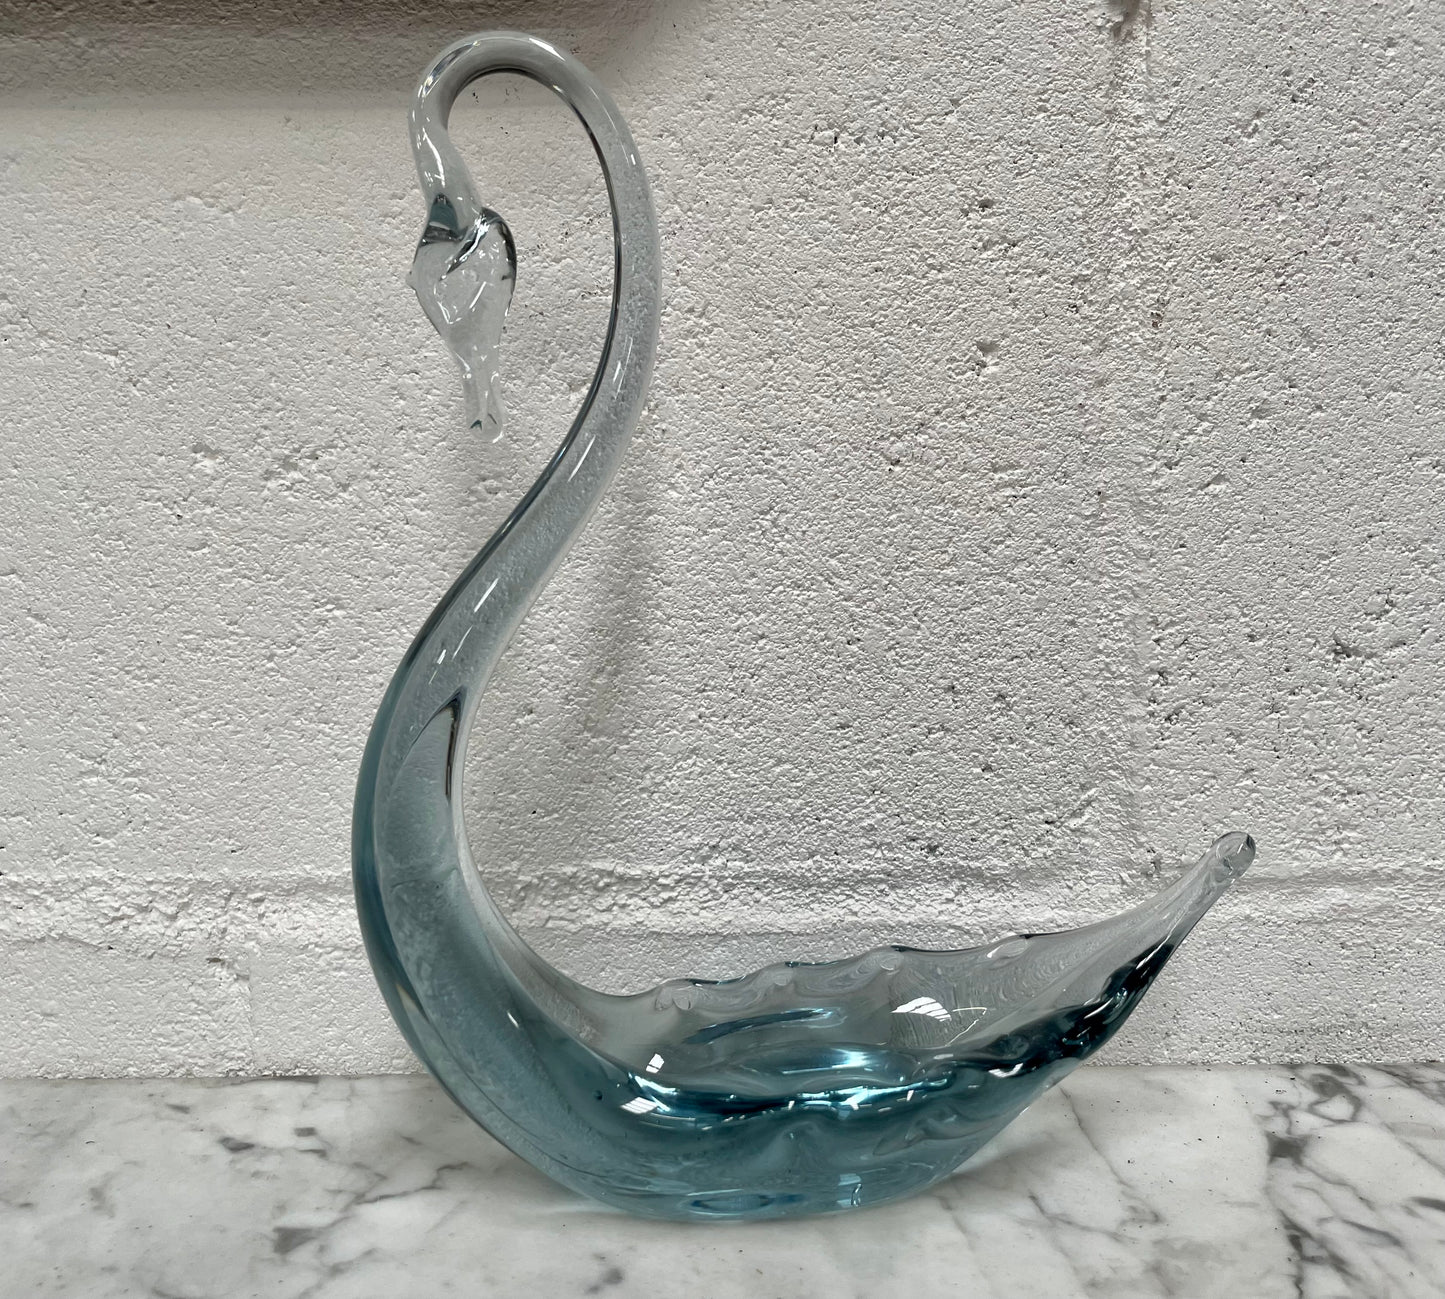 Lovely Vintage Murano style blue glass Swan. It is in good original condition. Please see photos as they form part of the description